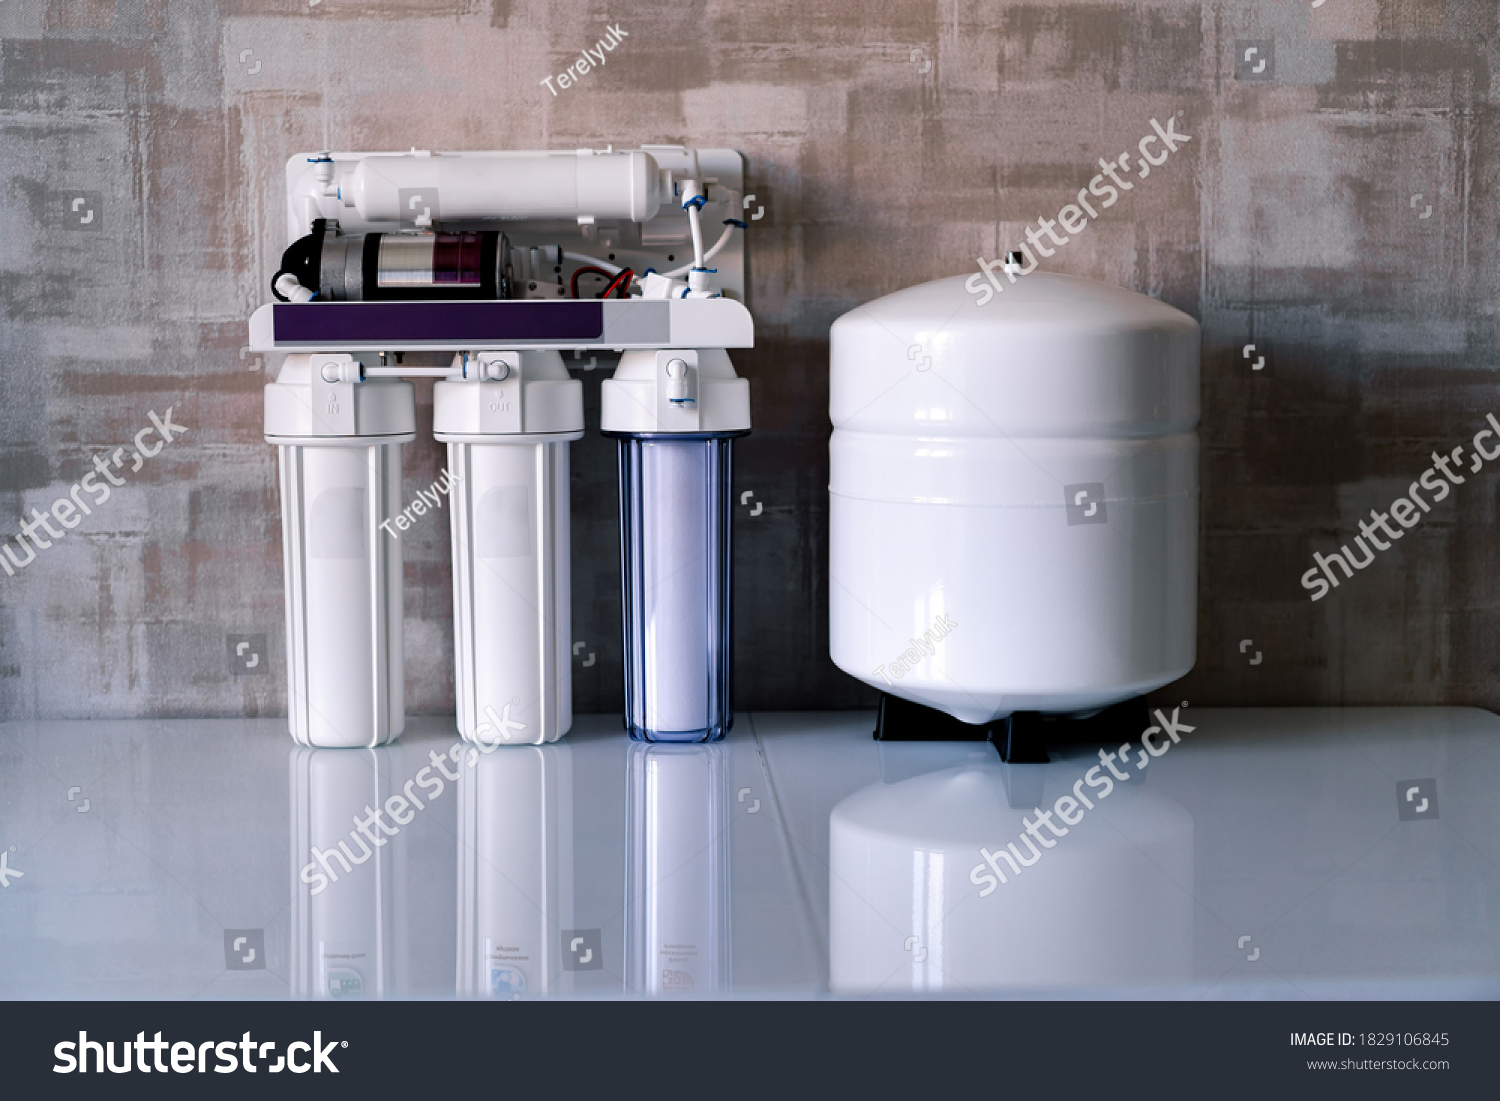 Reverse osmosis water purification system at home. Installed water purification filters. Clear water concept #1829106845